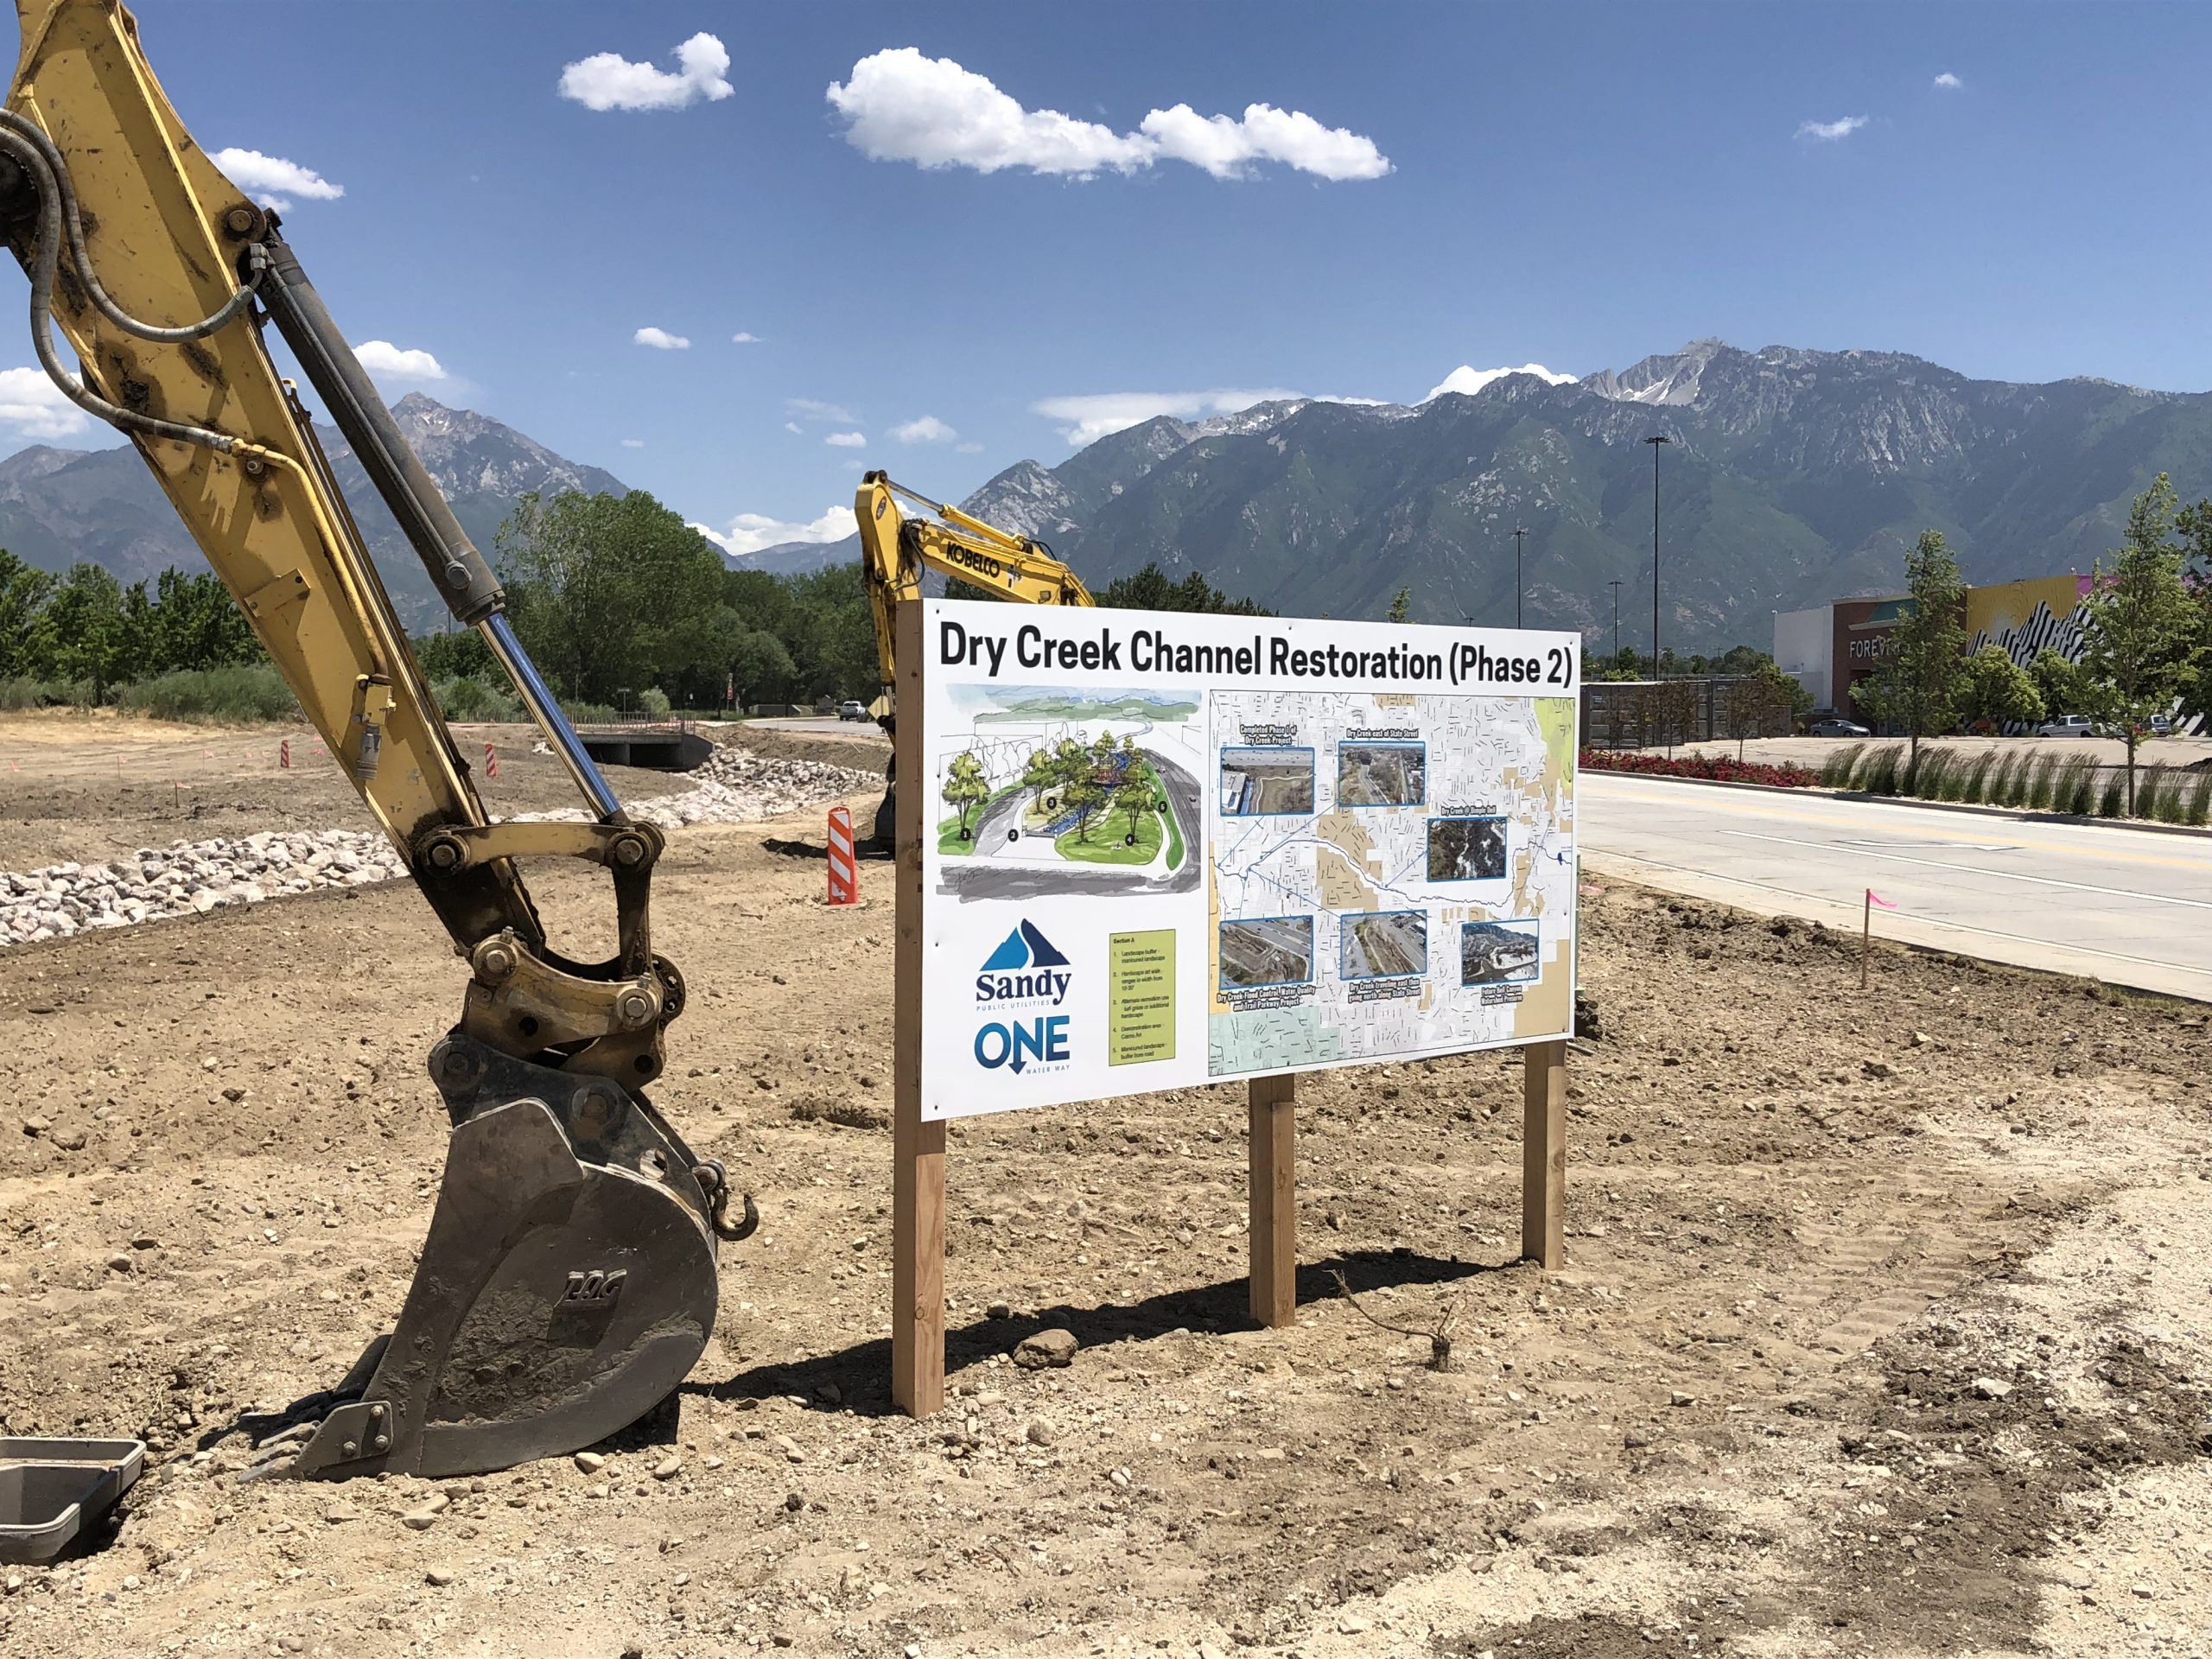 Dry Creek Channel construction site with sign showing restoration plan.